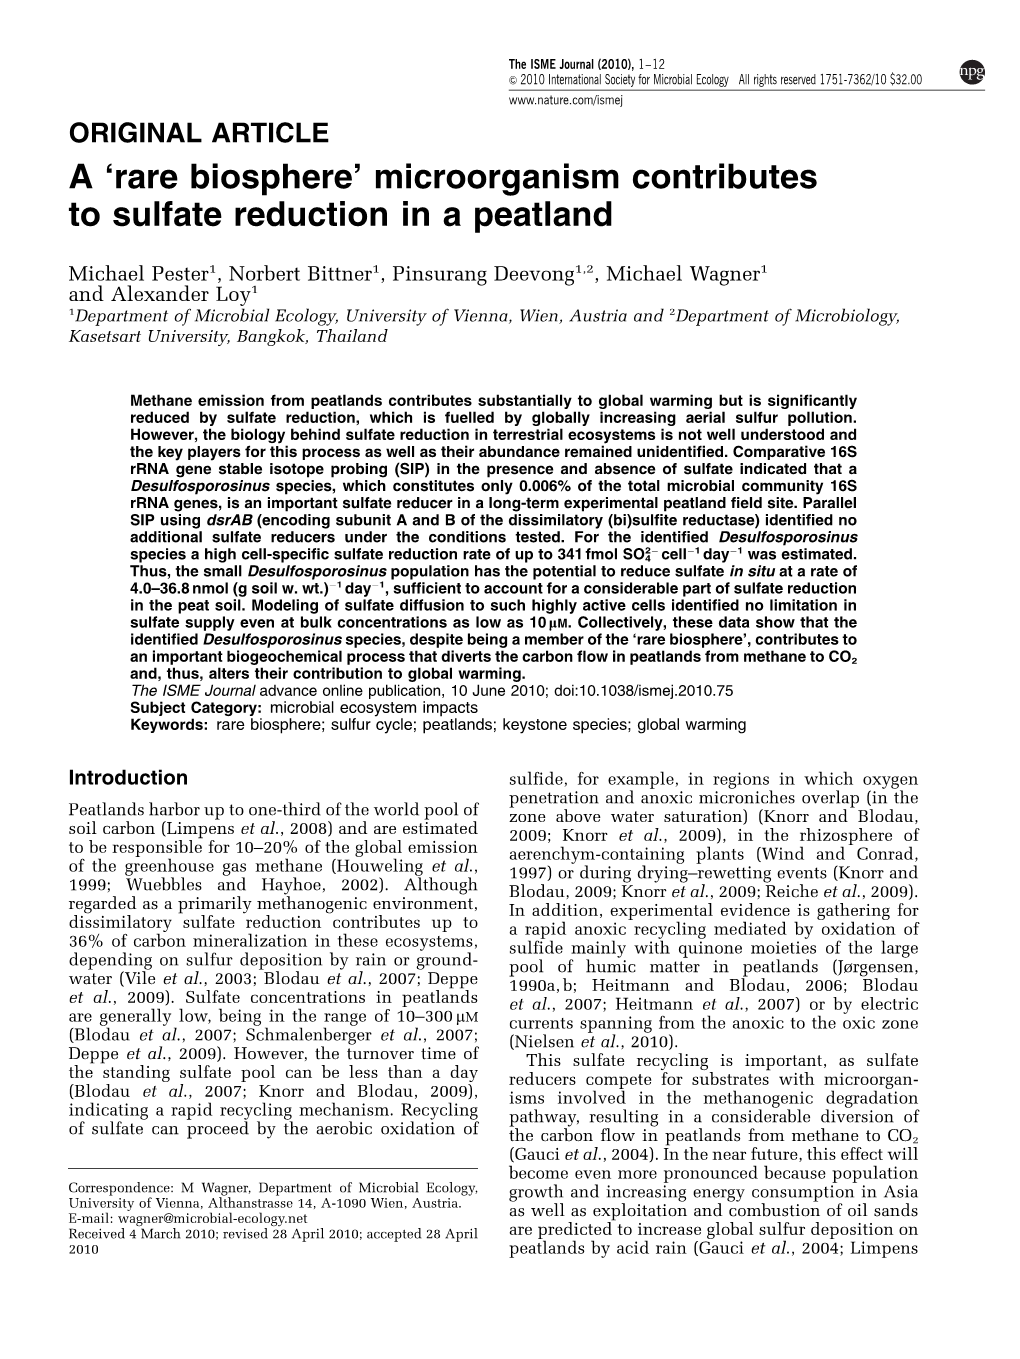 Microorganism Contributes to Sulfate Reduction in a Peatland